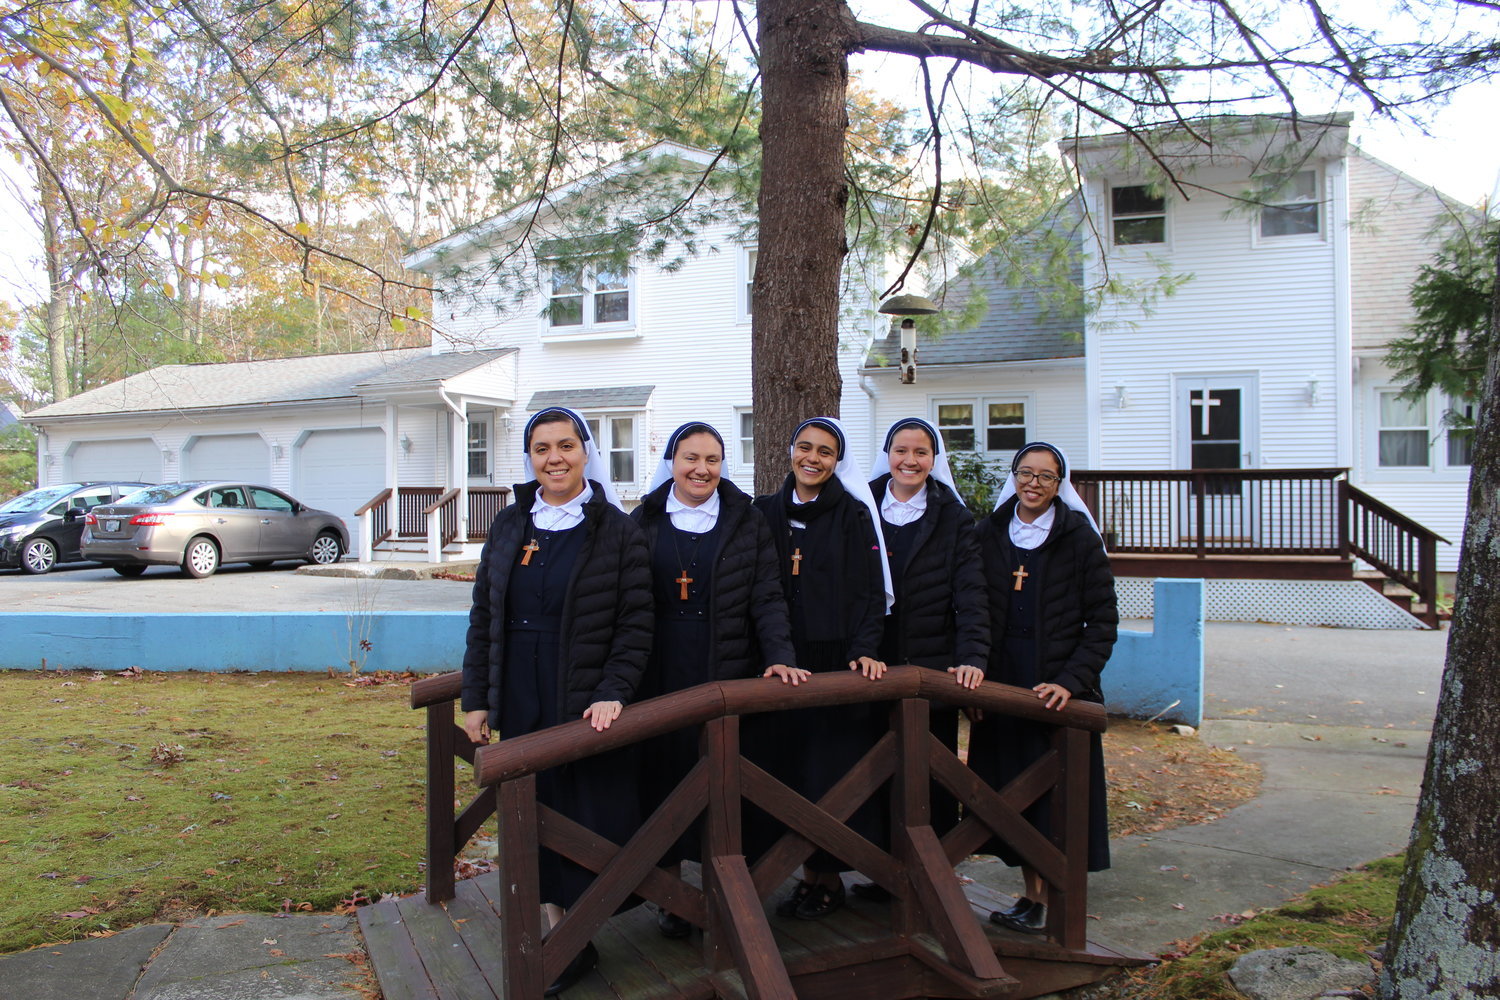 ON A MISSION: From left, Sisters Veronica Sanchez, Wendy Palacios, Jessica Bernal, Cristina Gomez and Nancy Ortiz enjoy the grounds of the newly established novitiate of the Missionary Sisters, Servants of the Word who founded it as the first in the U.S. The sisters will spend the next year preparing for a ministry of evangelizing to the laity.